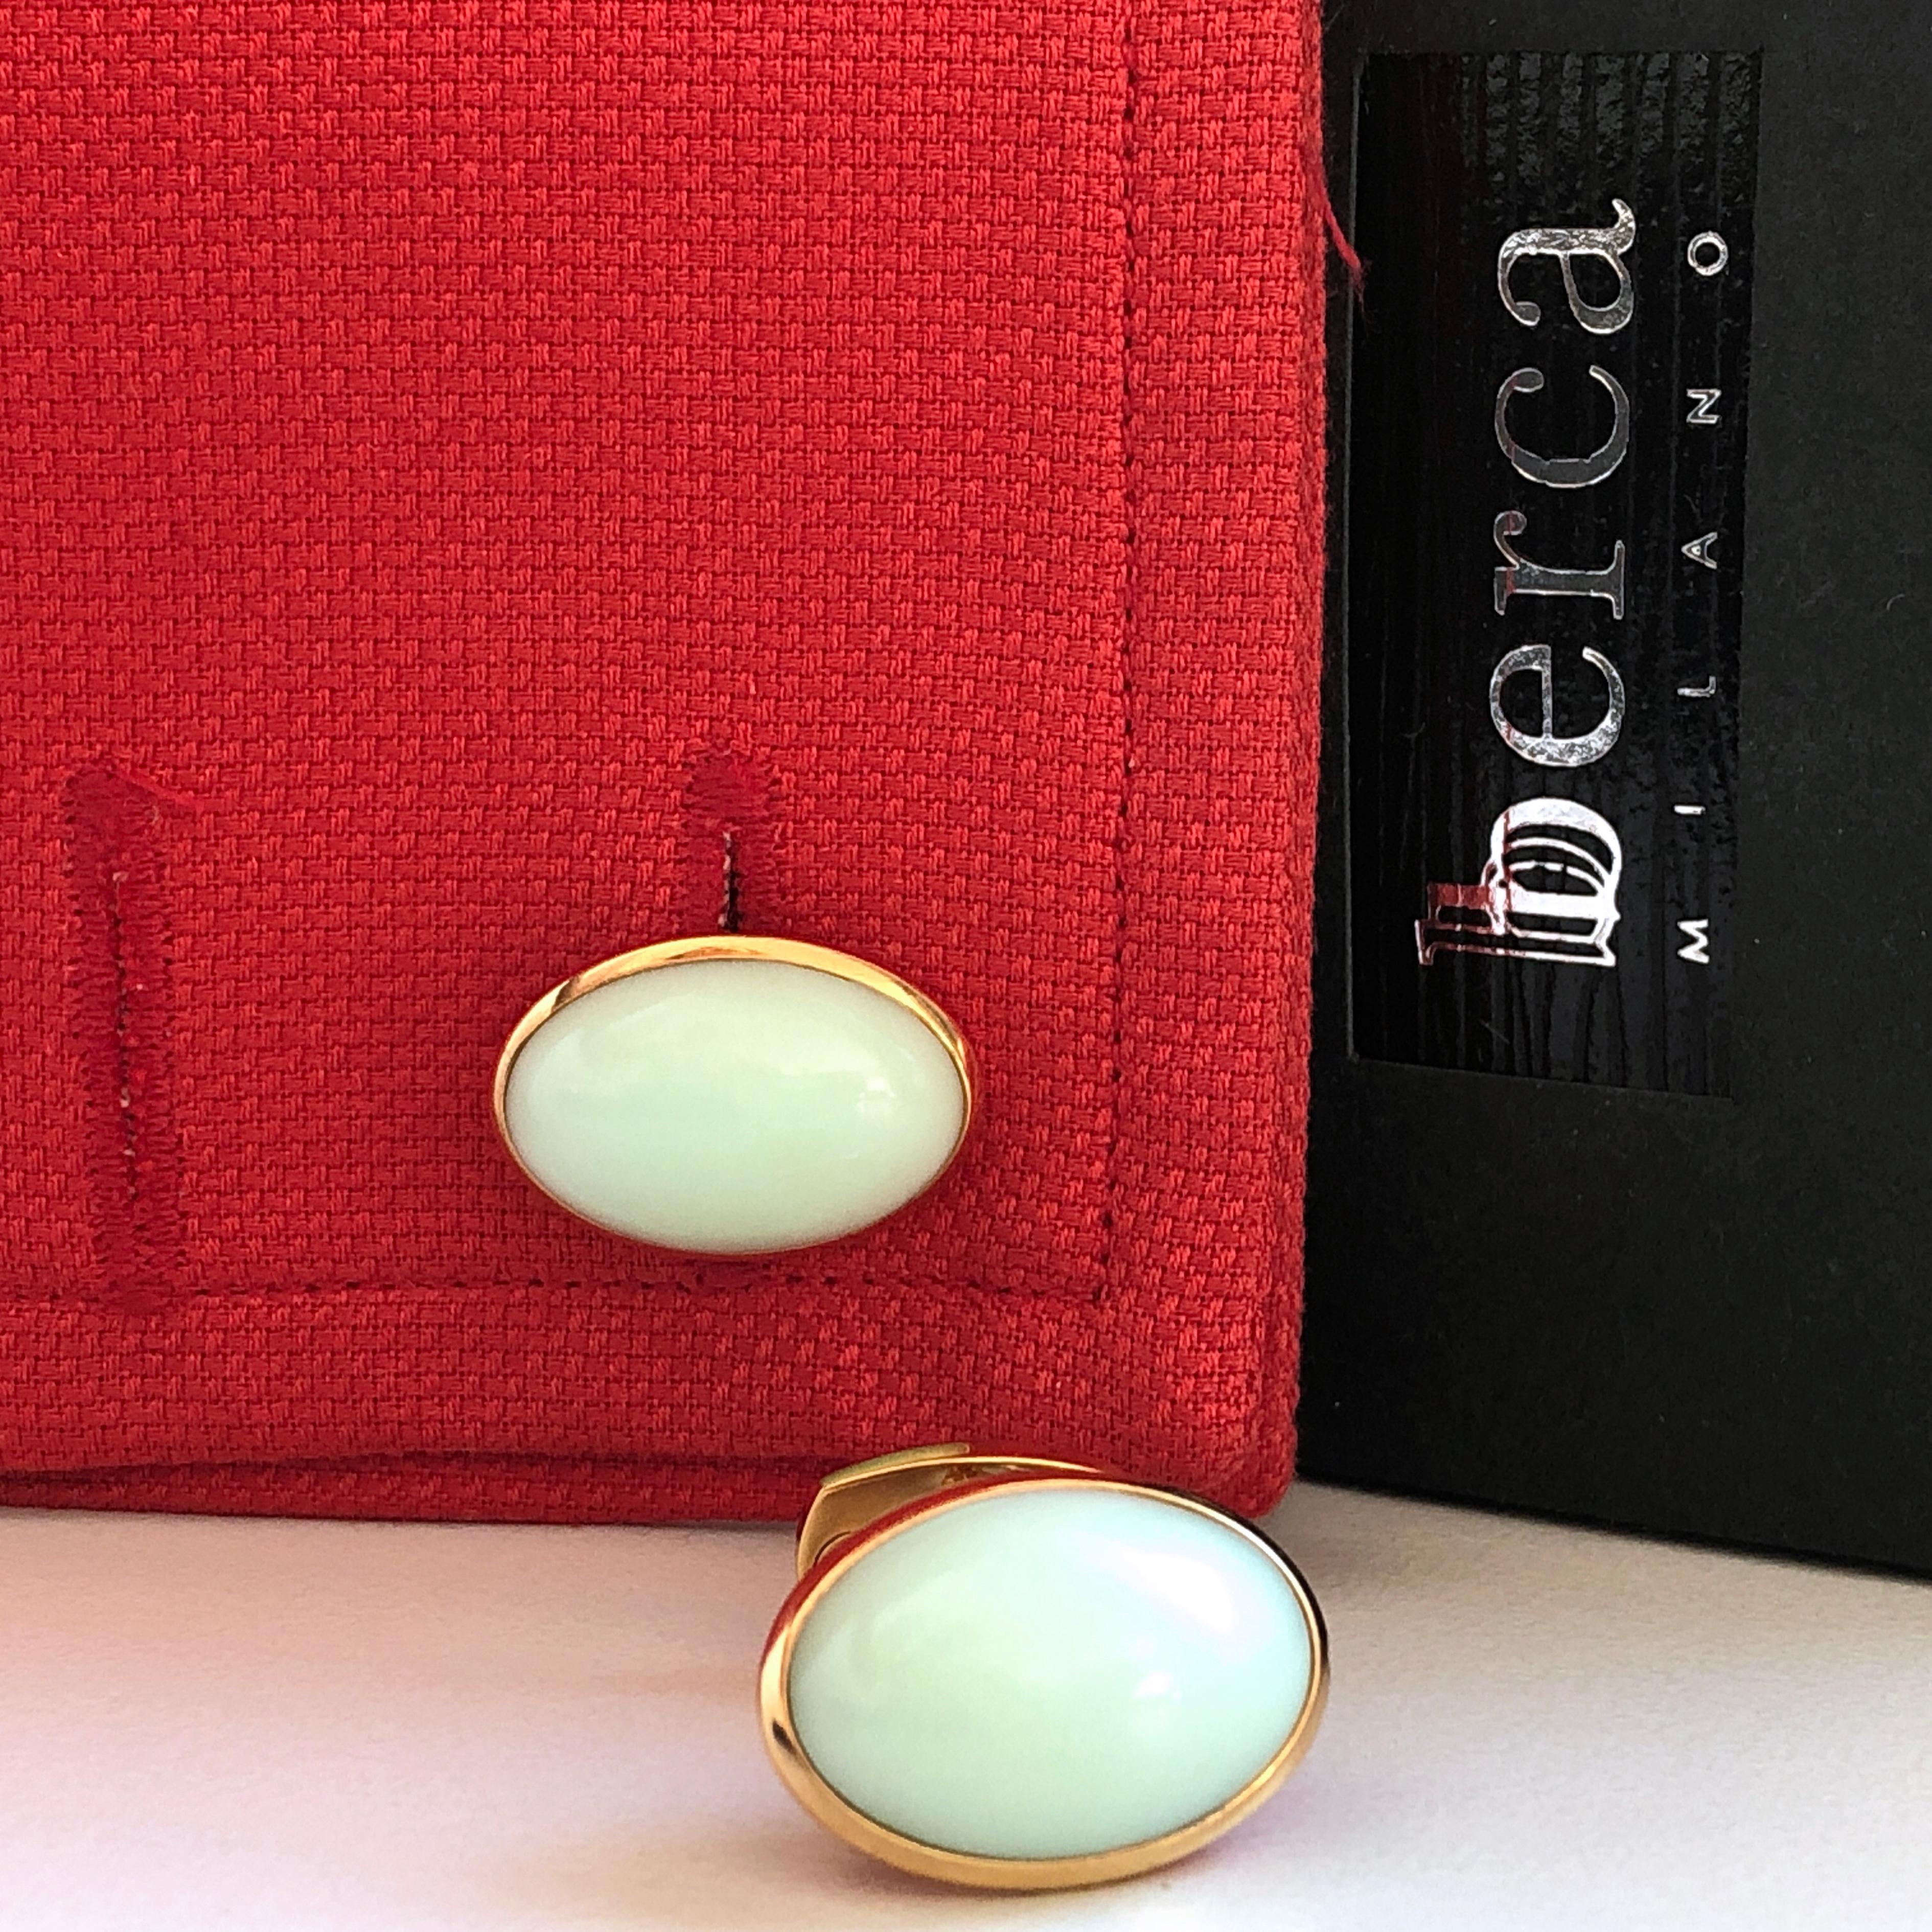 Berca Natural Green Opal Cabochon Sterling Silver Gold-Plated Cufflinks 1